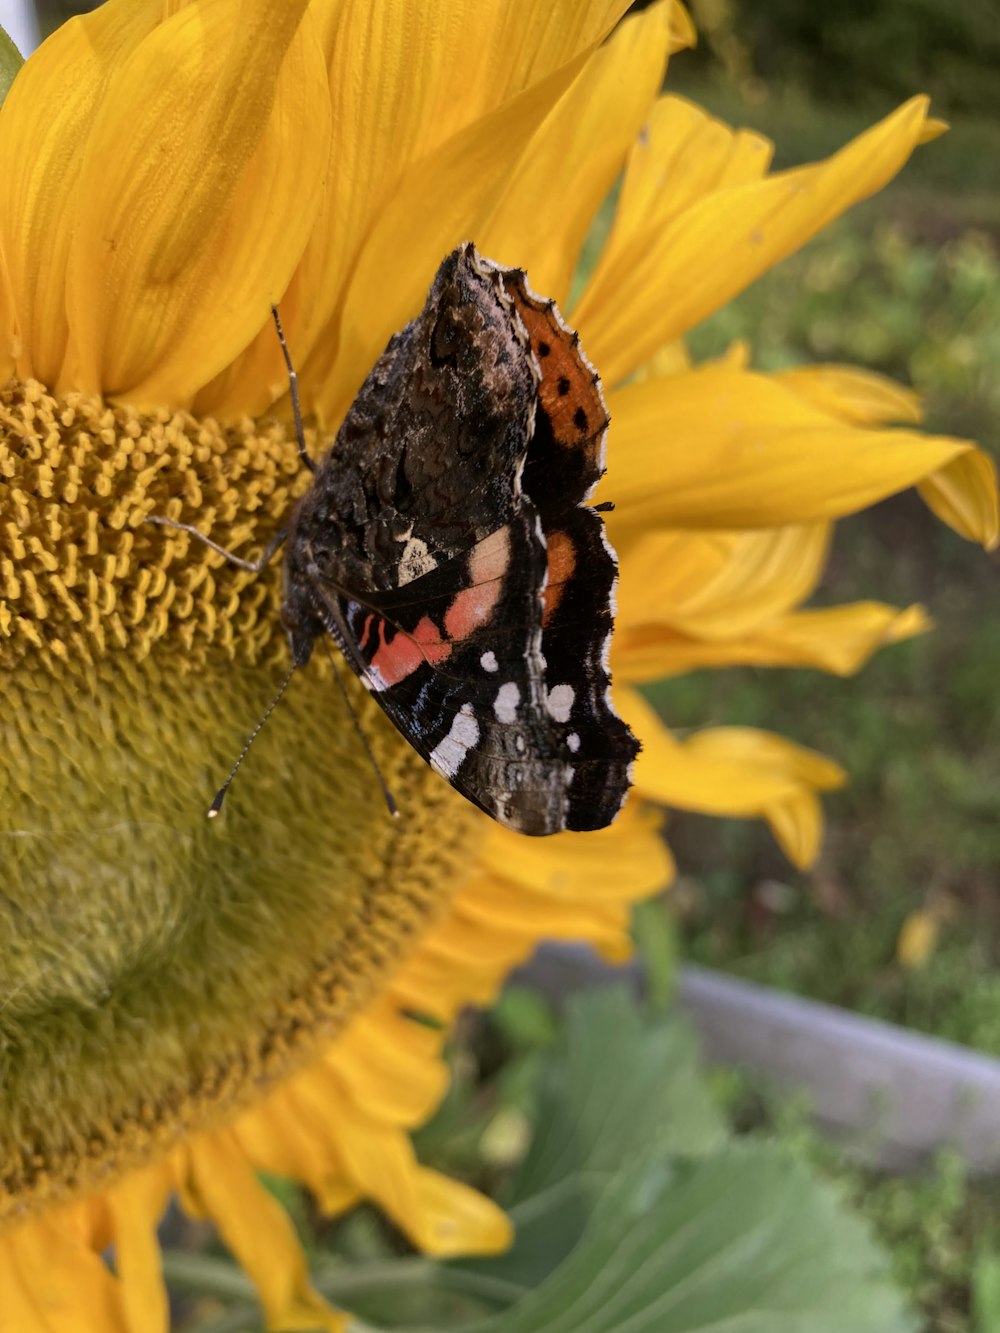 a close up of a butterfly on a sunflower